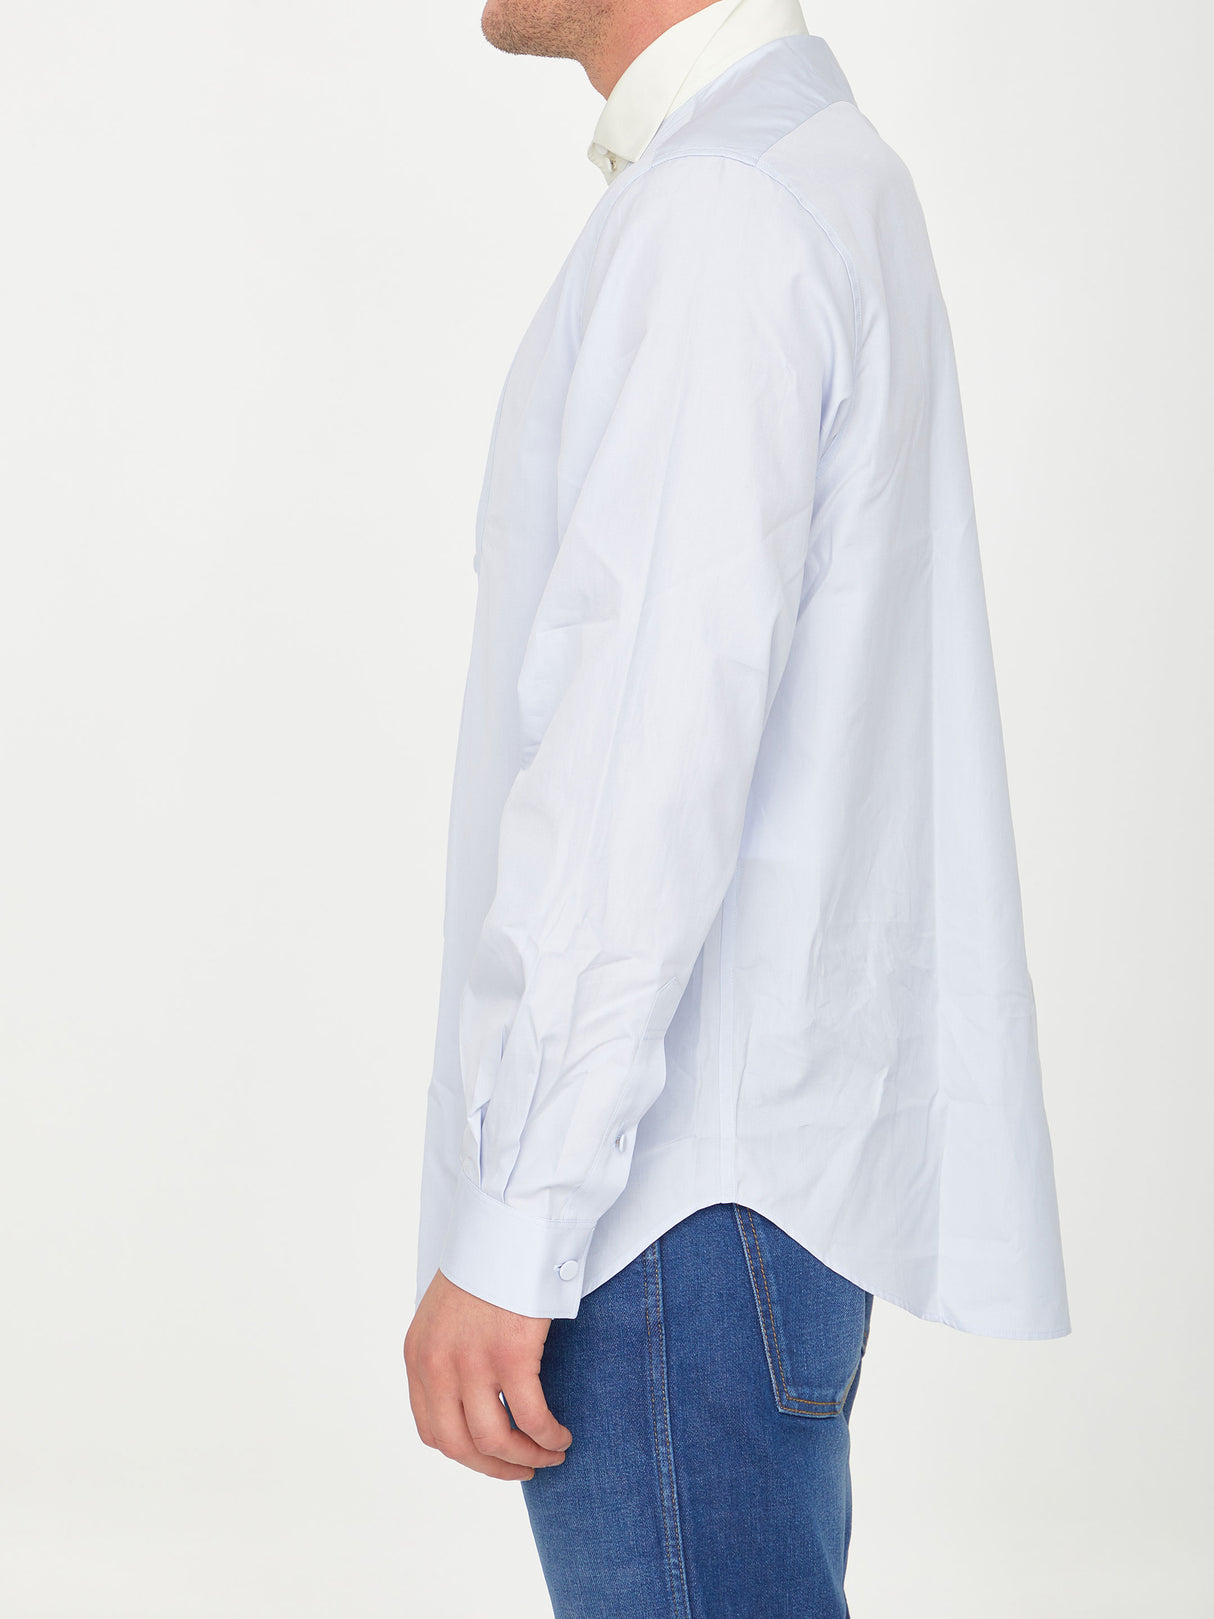 GUCCI Men's Cotton Poplin Shirt with Pleated Front Panel and Contrasting Collar - Light Blue